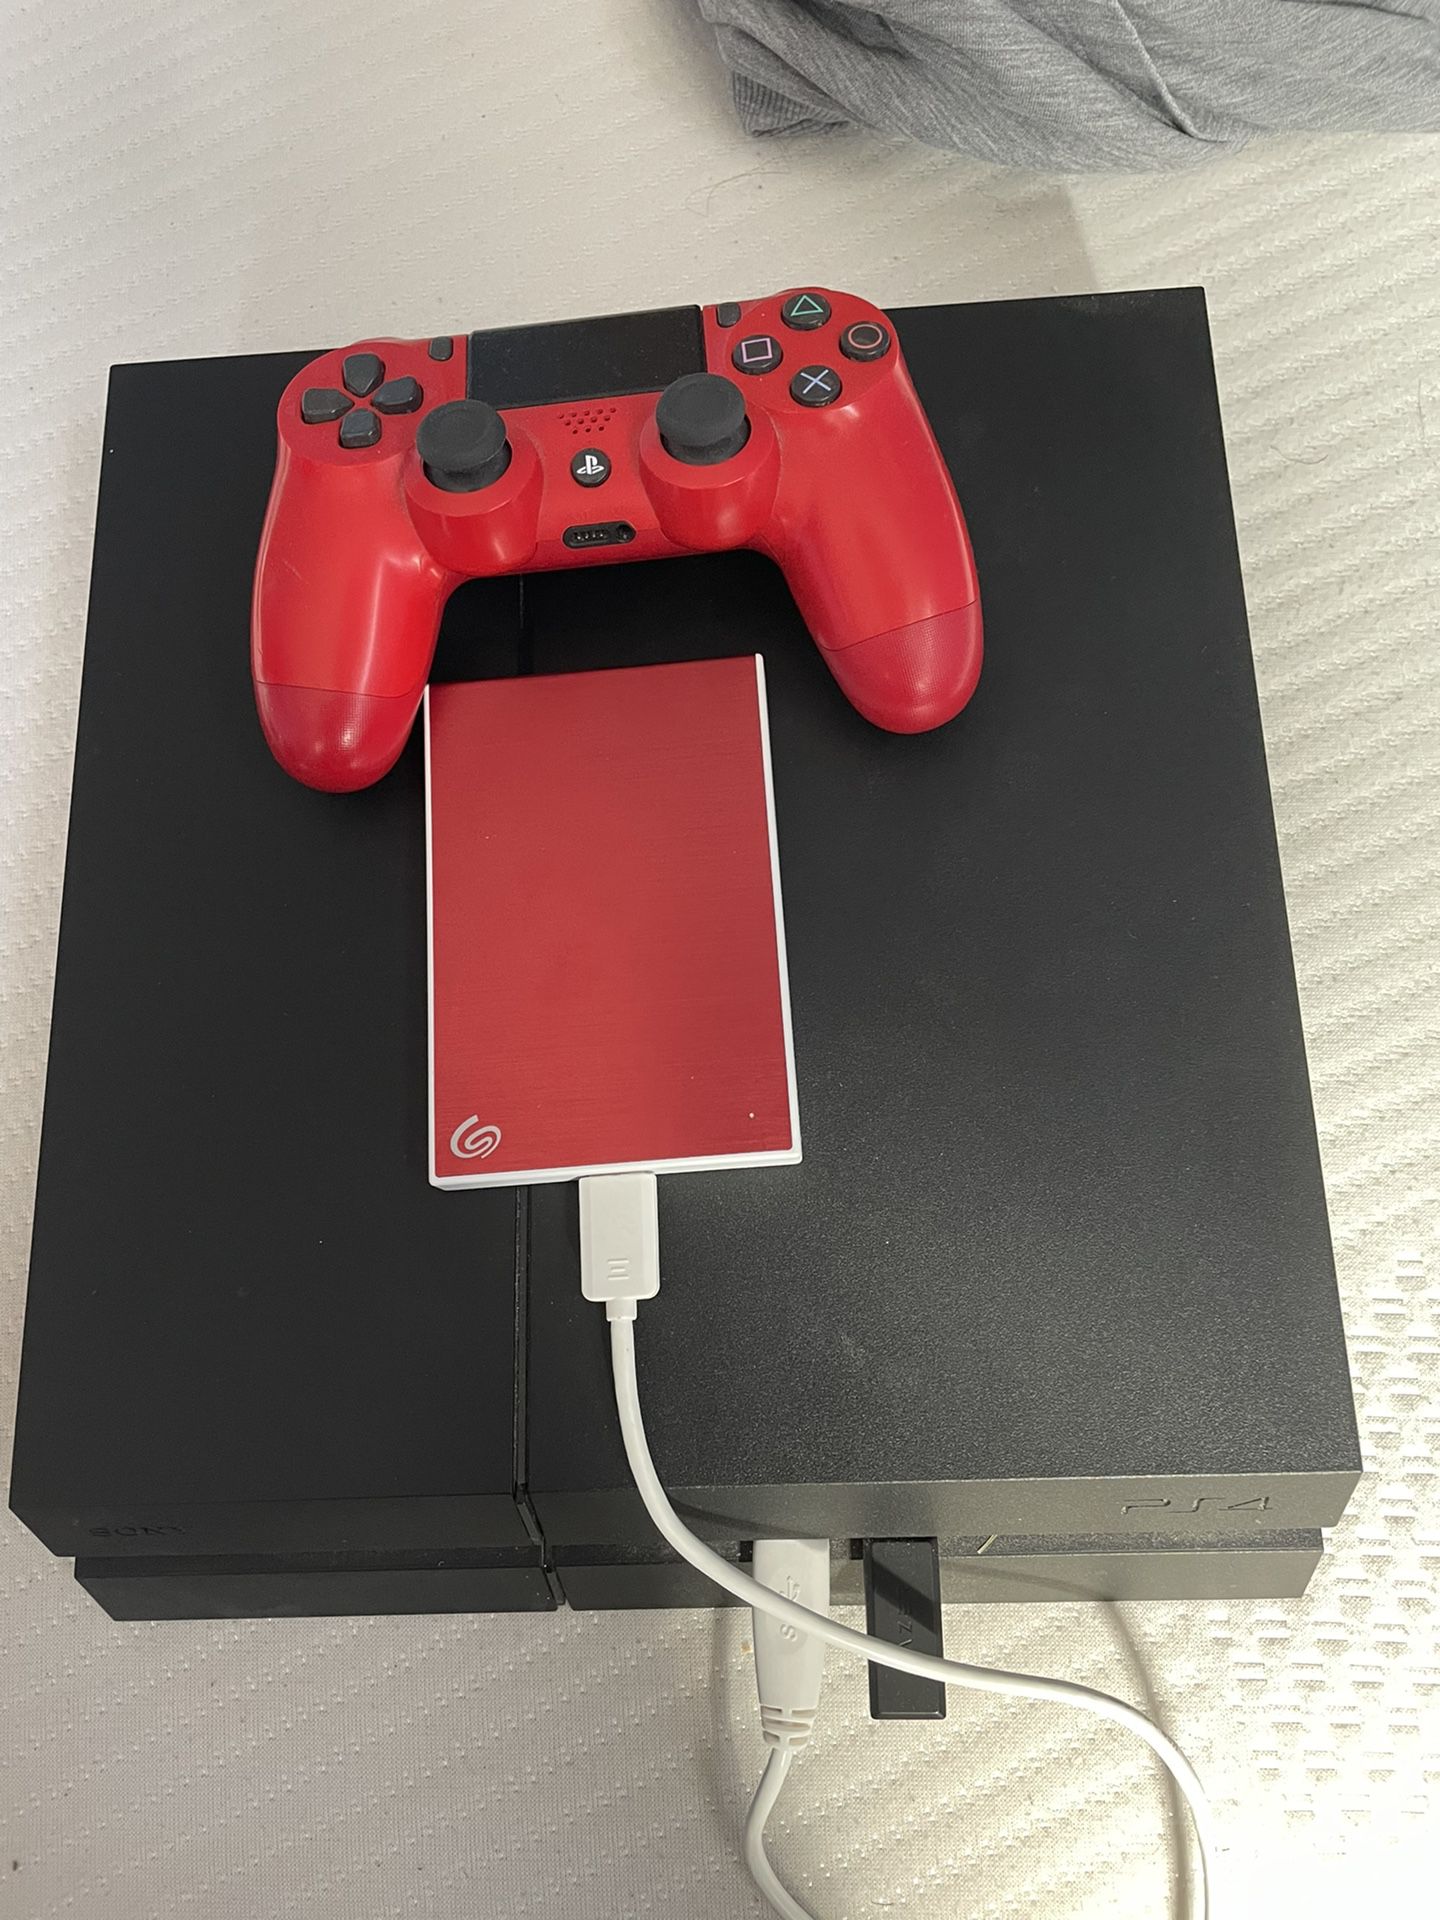 Ps4 With Hard drive, Remote and Headset